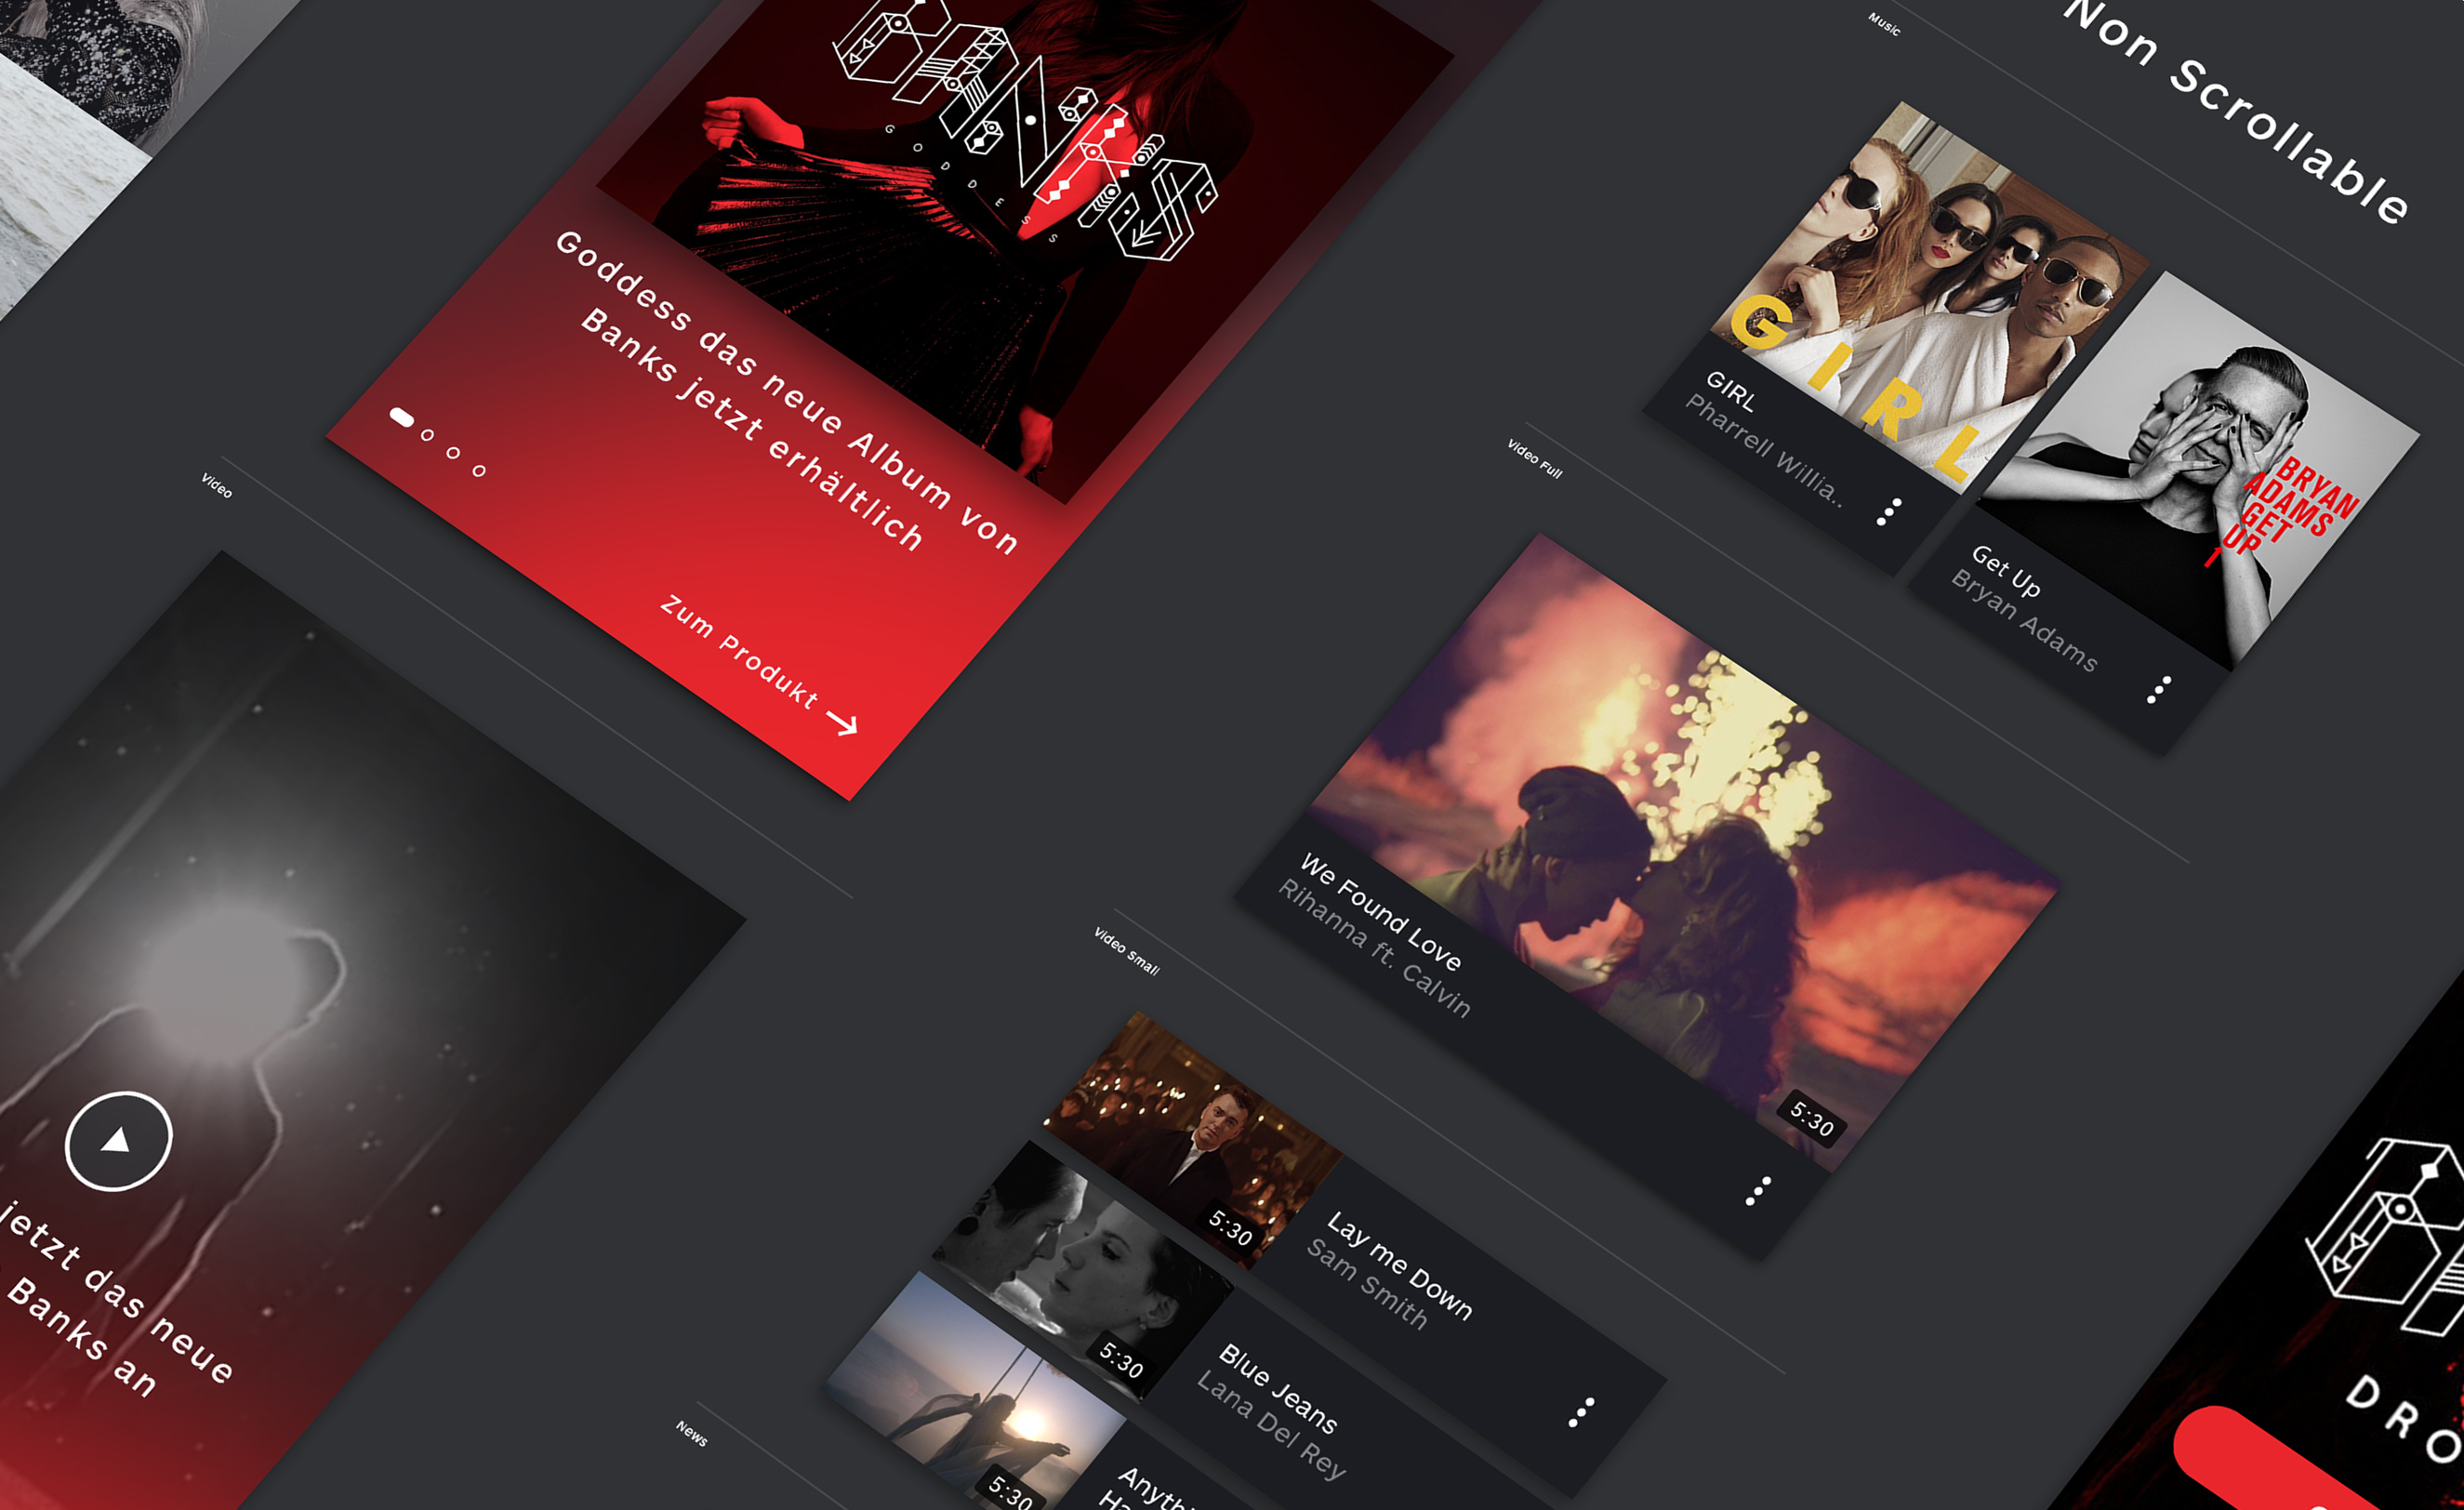 Isometric view on modules from Universal-Music Group Germany